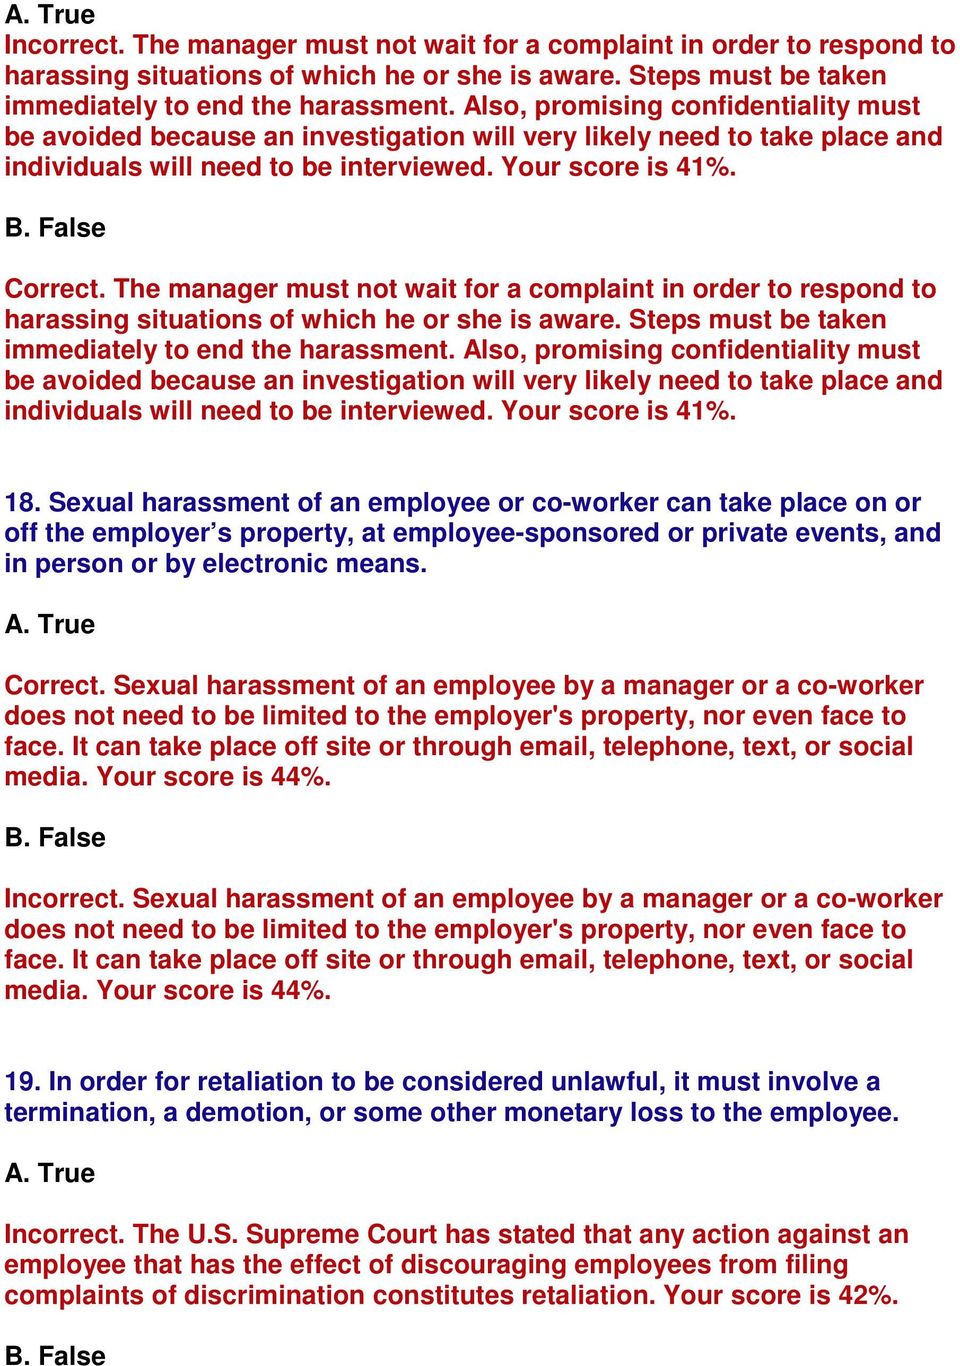 The manager must not wait for a complaint in order to respond to harassing situations of which he or she is aware. Steps must be taken immediately to end the harassment.